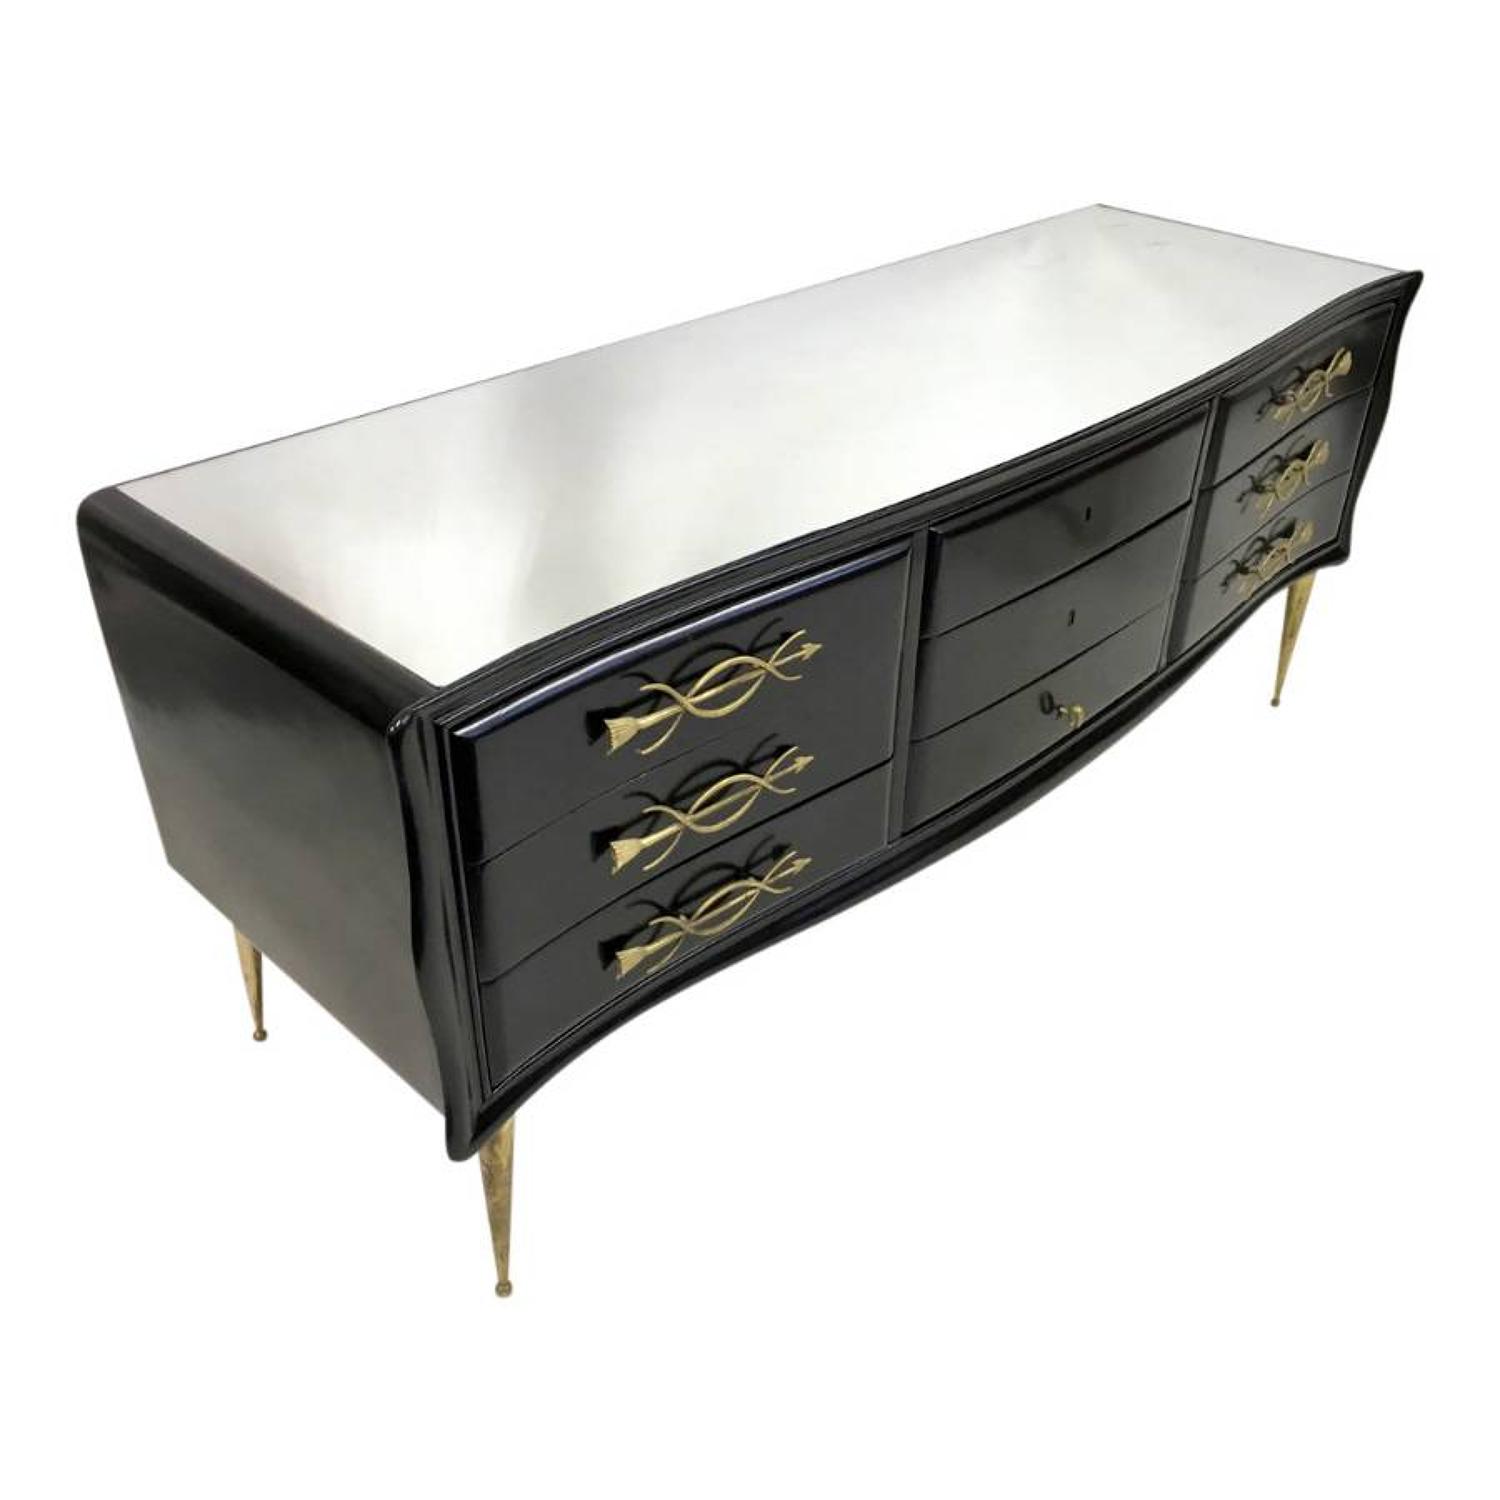 1950s Italian black lacquered sideboard with brass legs